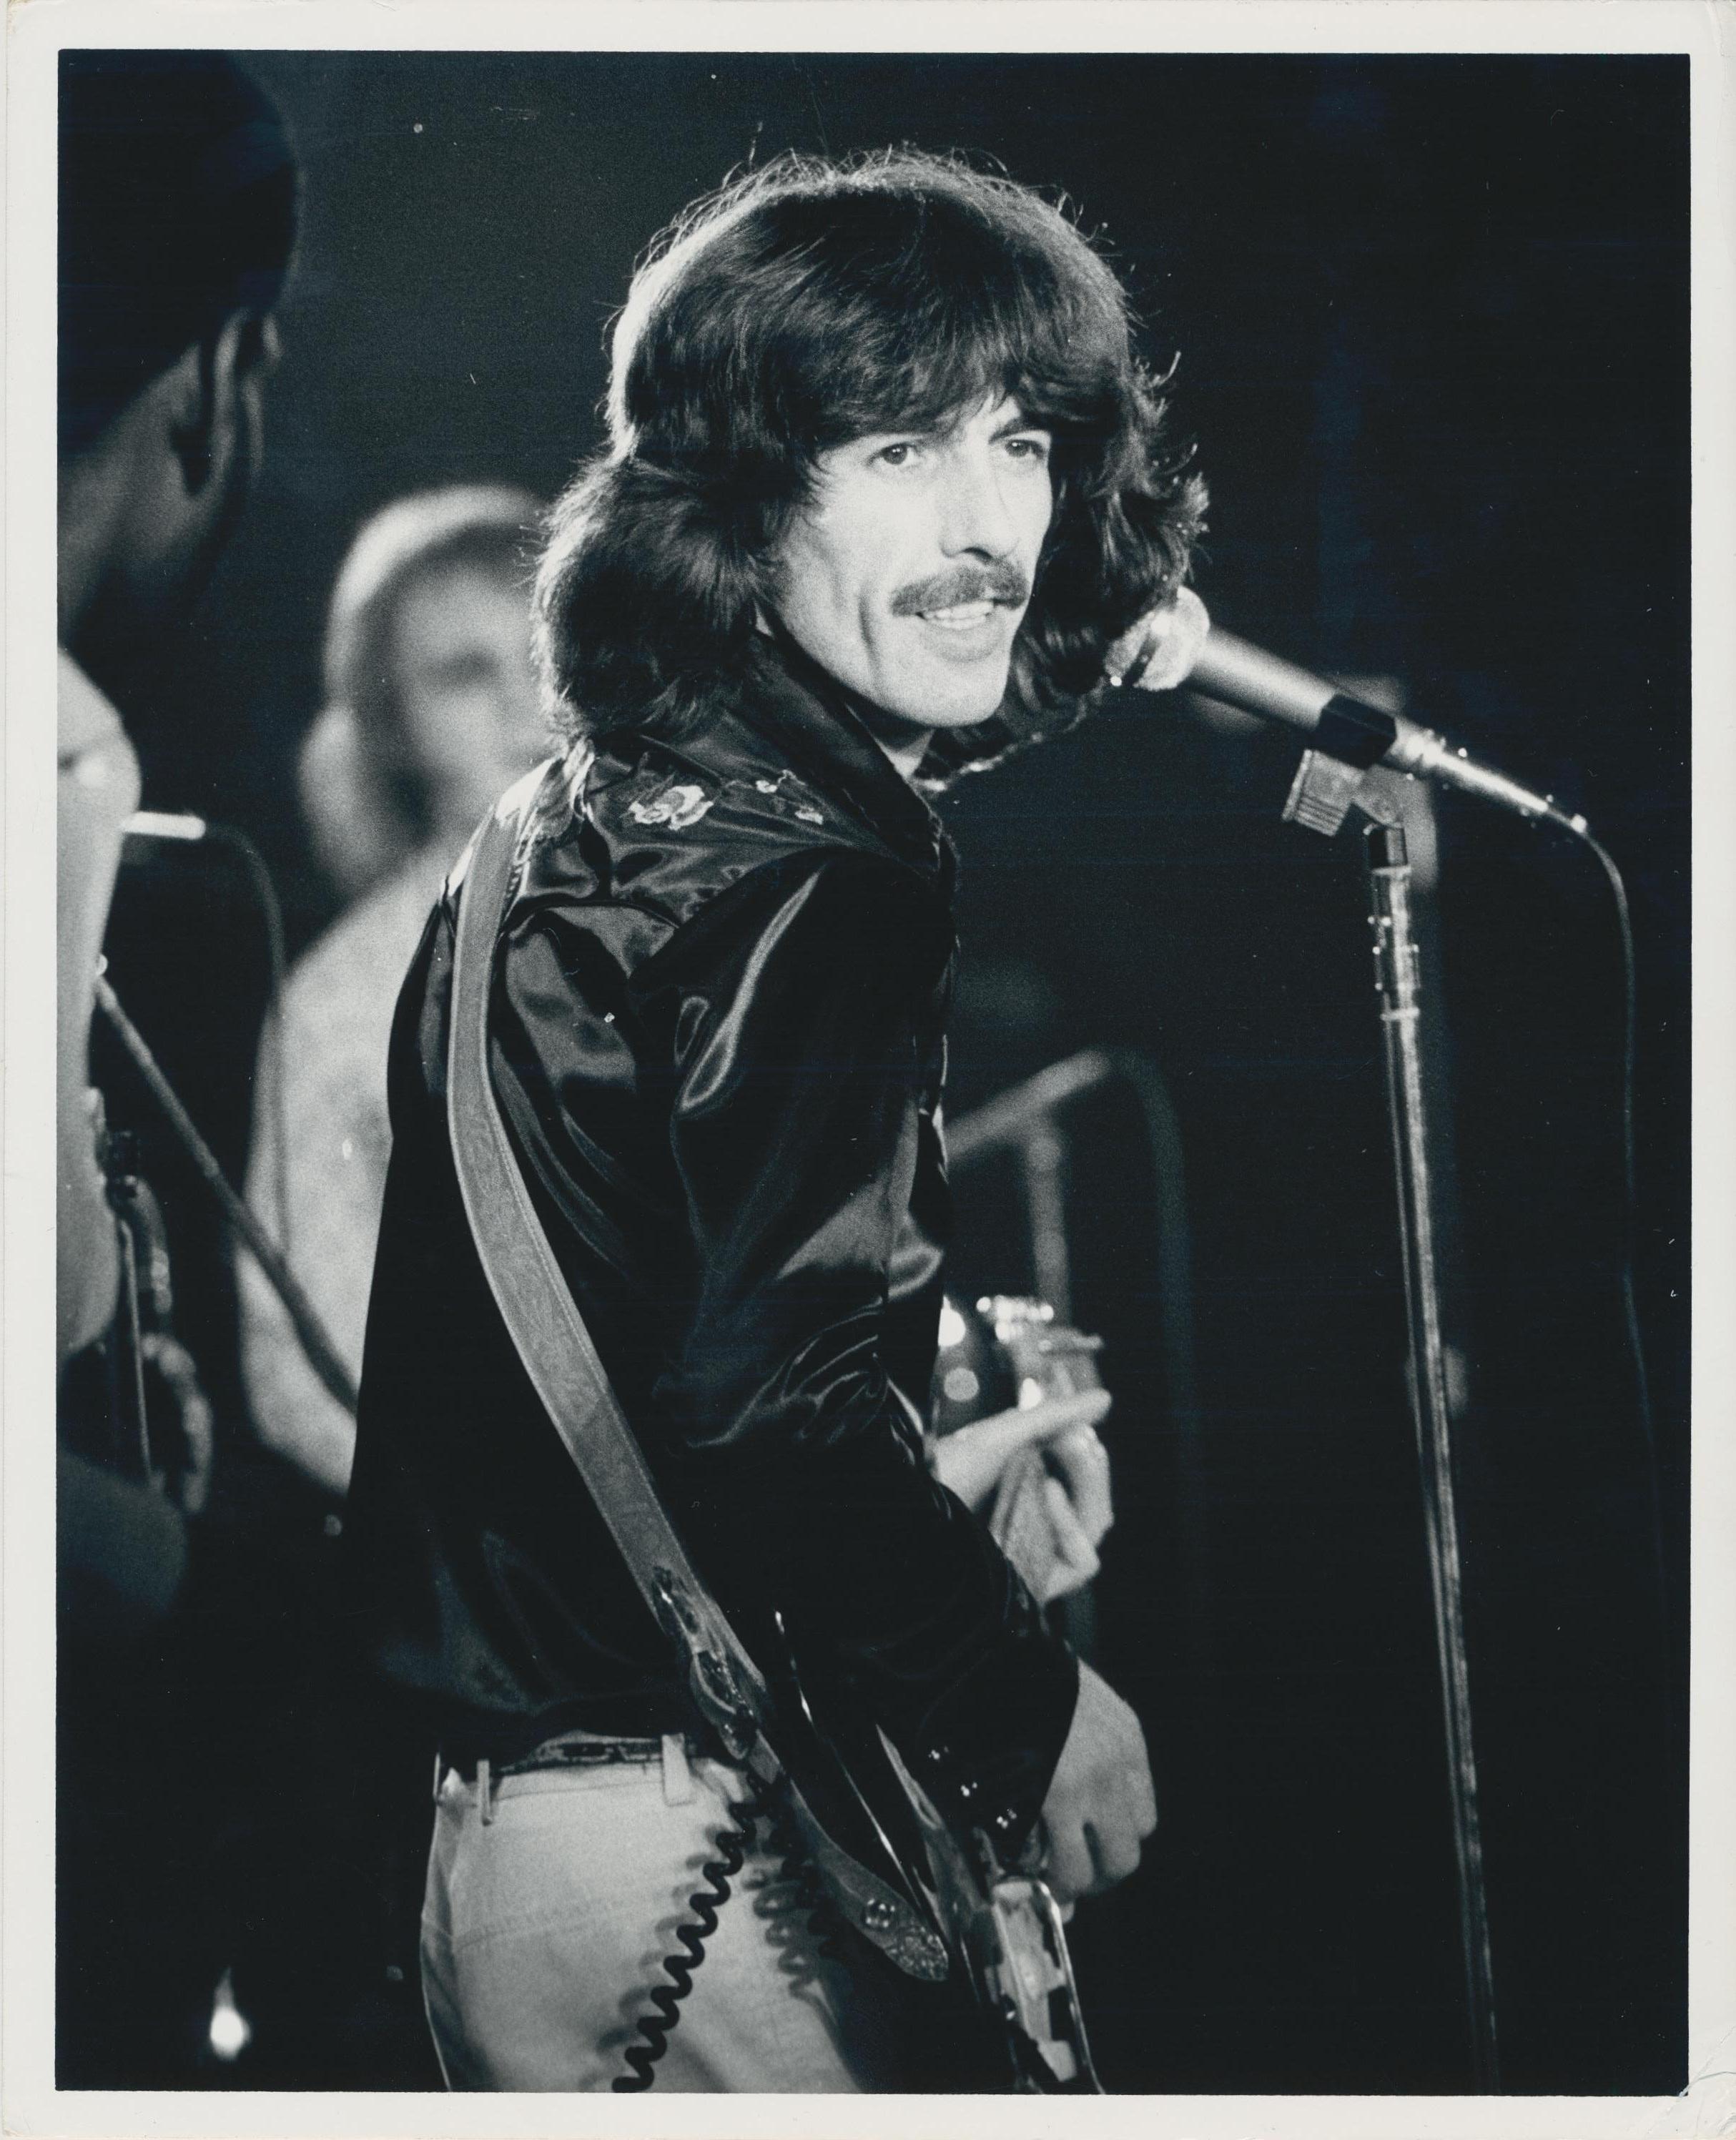 Henry Grossman Portrait Photograph - George Harrison on Stage, Black and White Photography, 25, 4 x 20, 6 cm